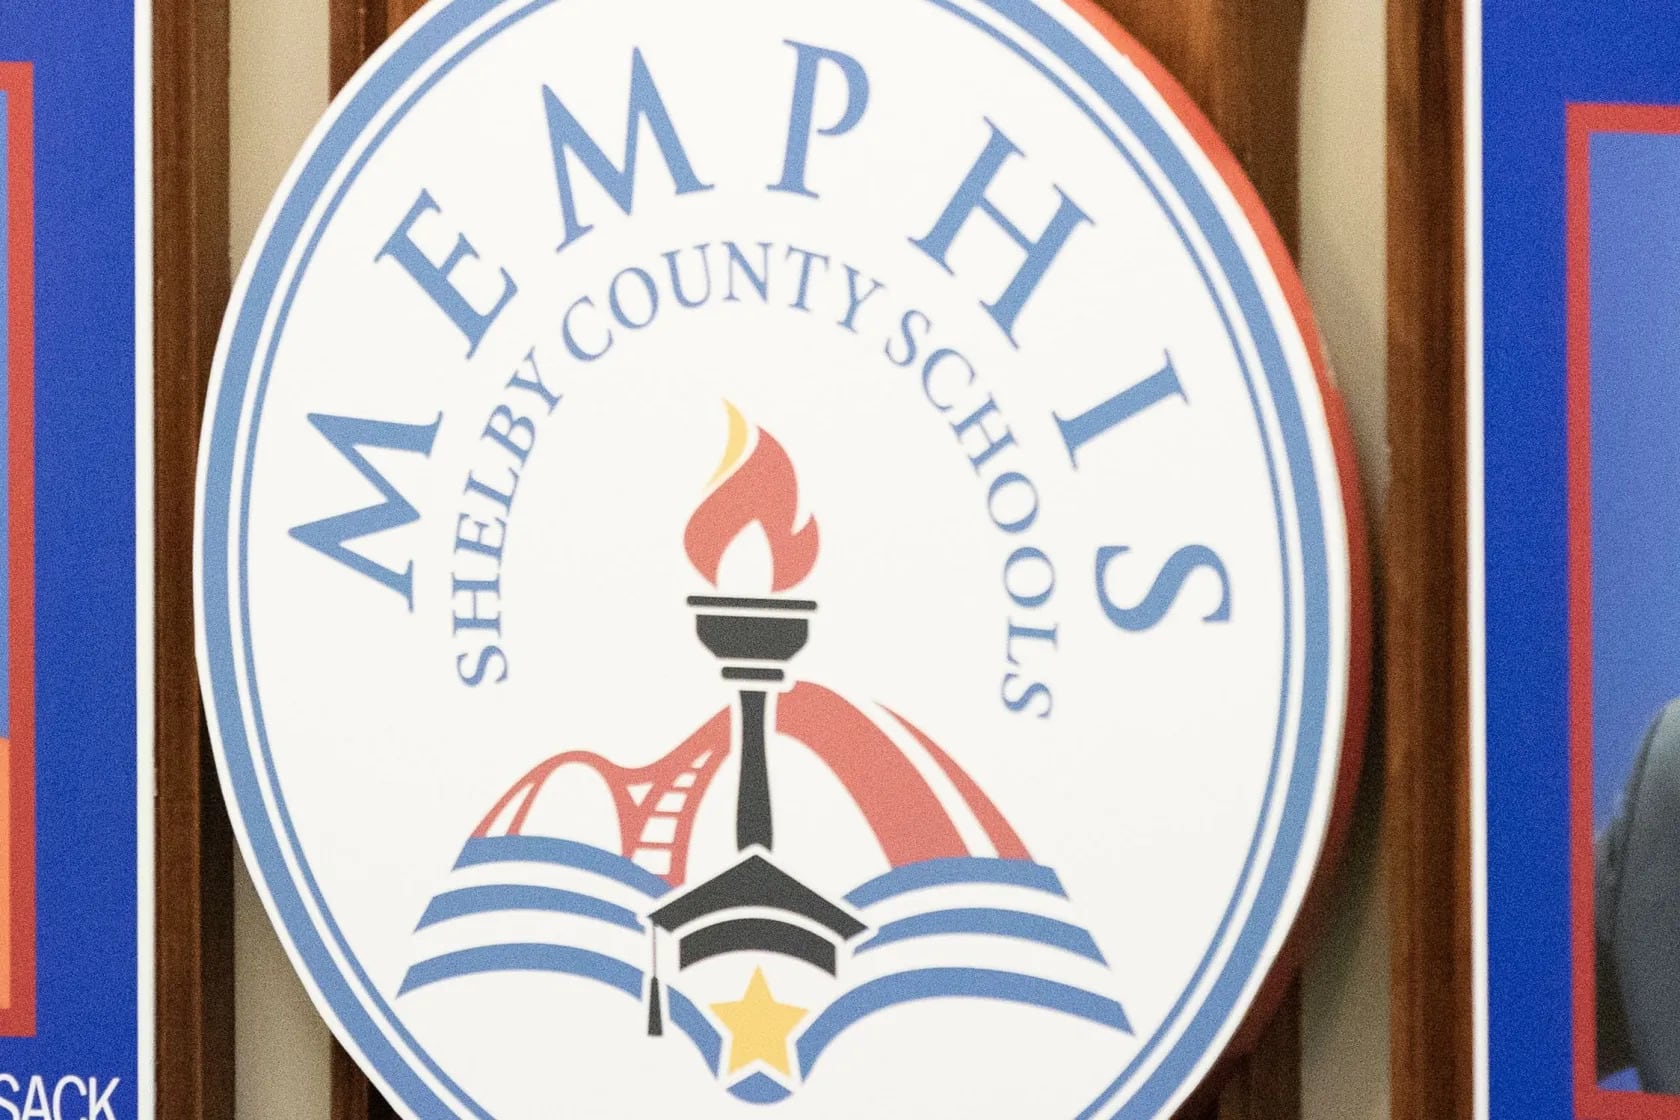 The logo of the Memphis Shelby County Schools district